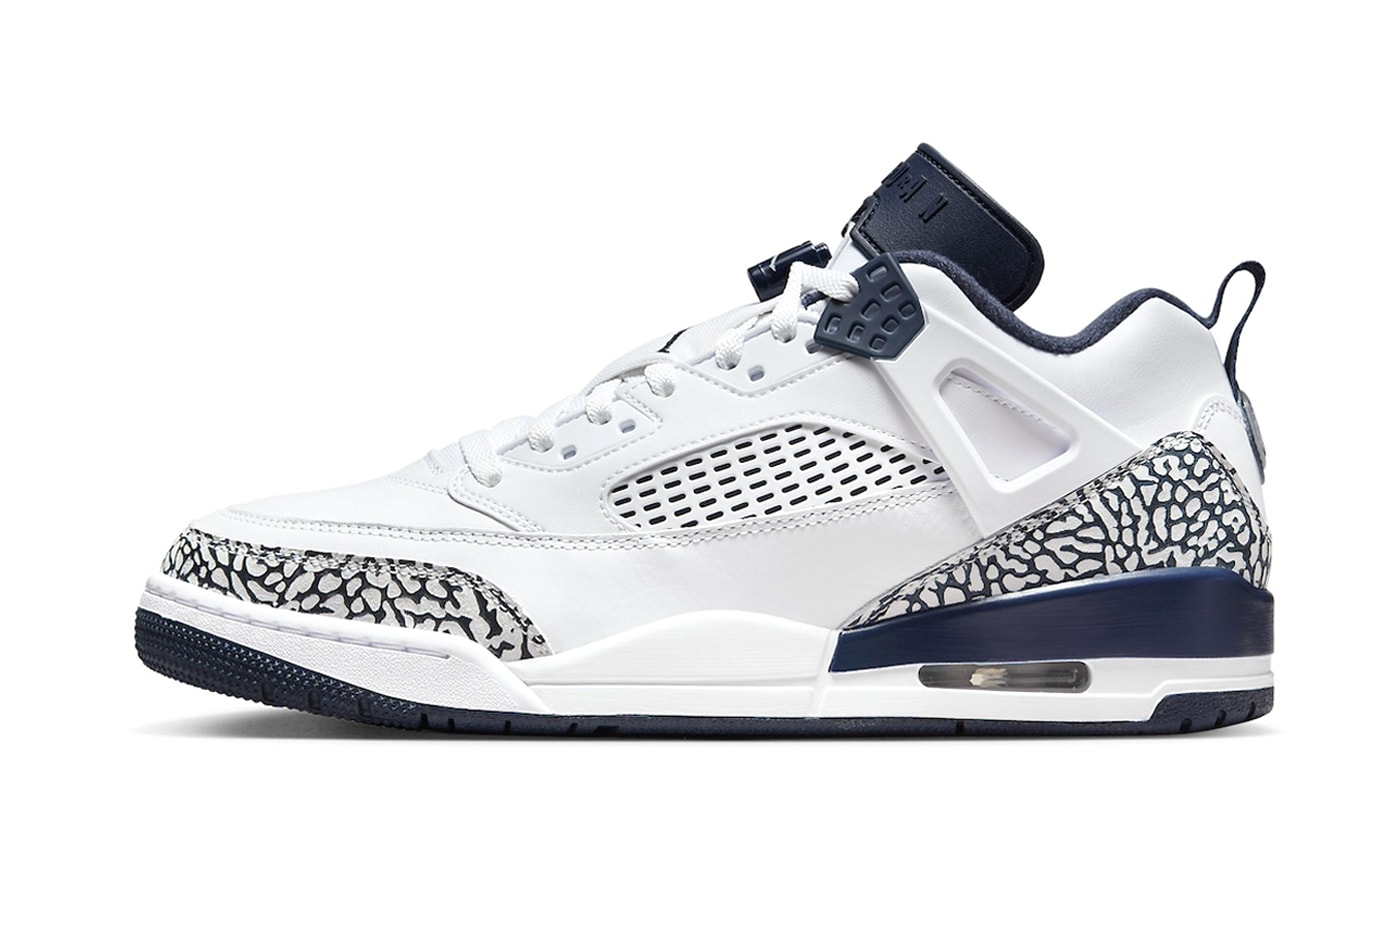 Official Look at the Jordan Spizike Low "Obsidian"